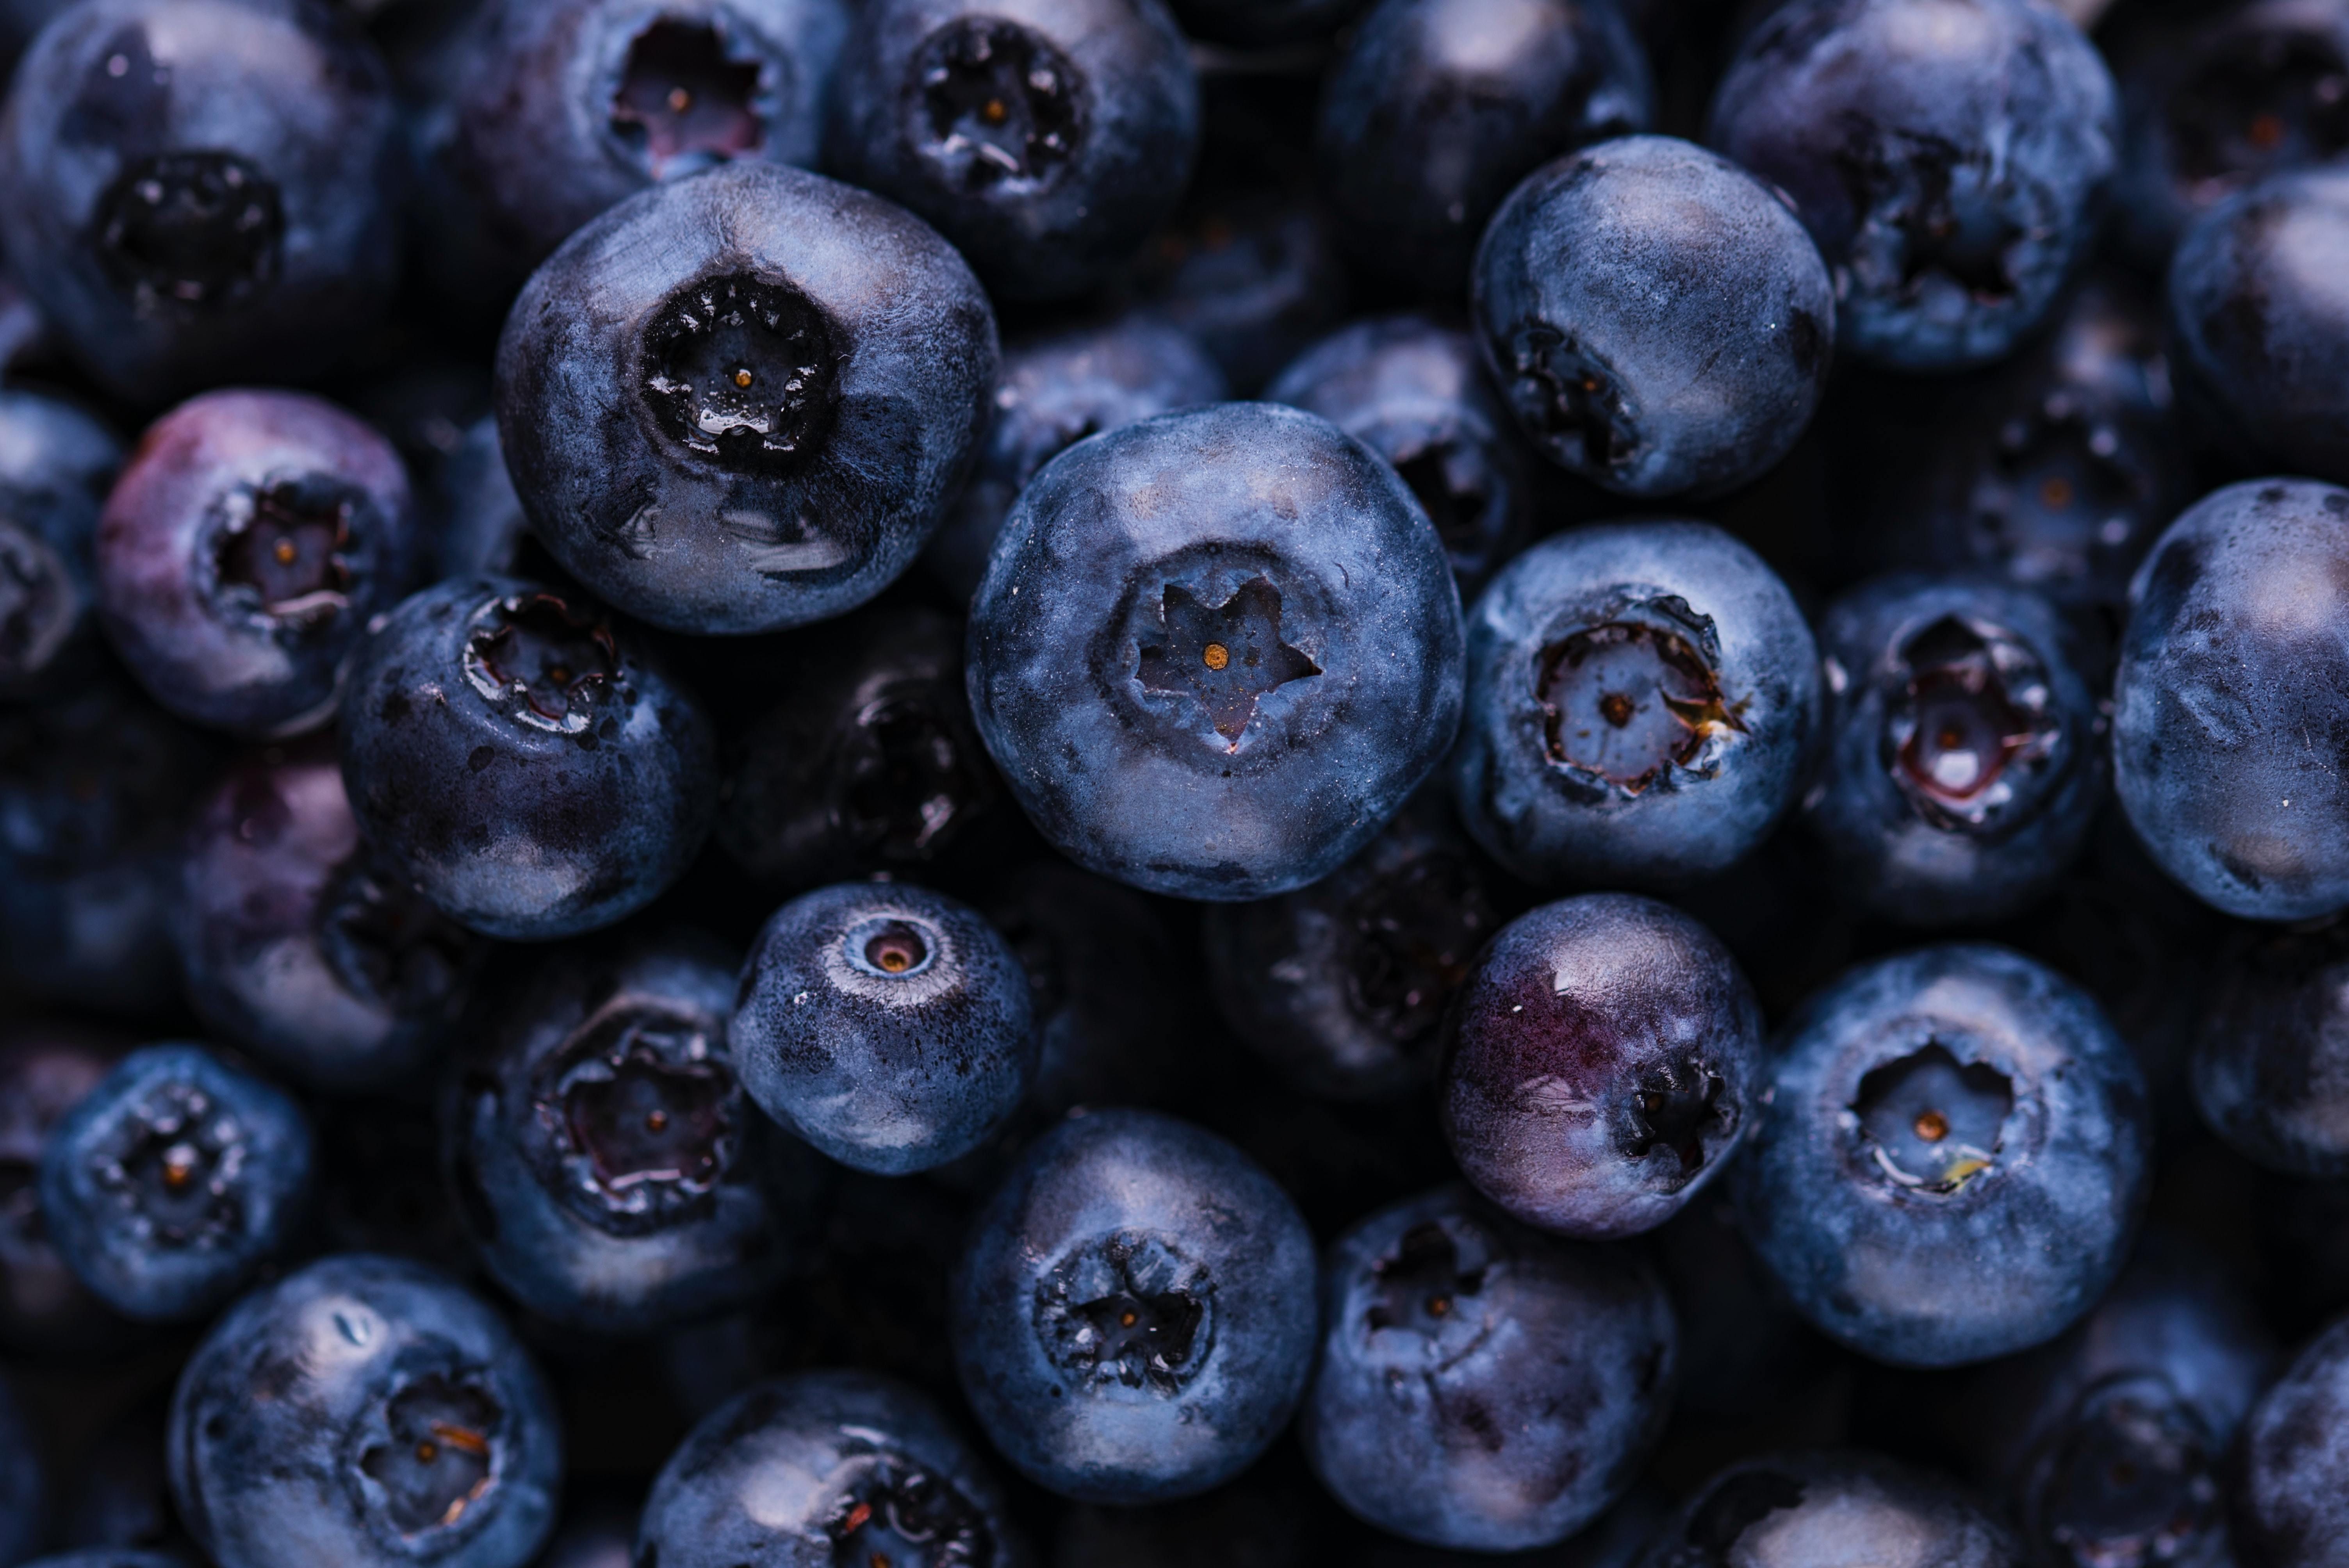 Background image of blueberries